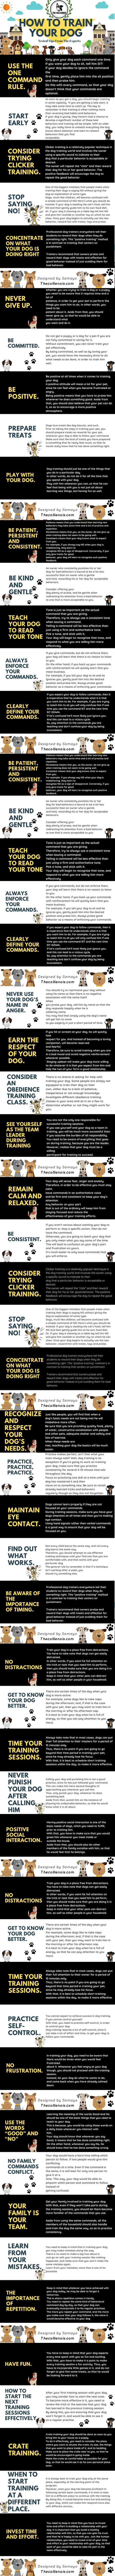 PUPPY TRAINING INFOGRAPHICS by SAMAYO - PRESS TO DOWNLOAD !